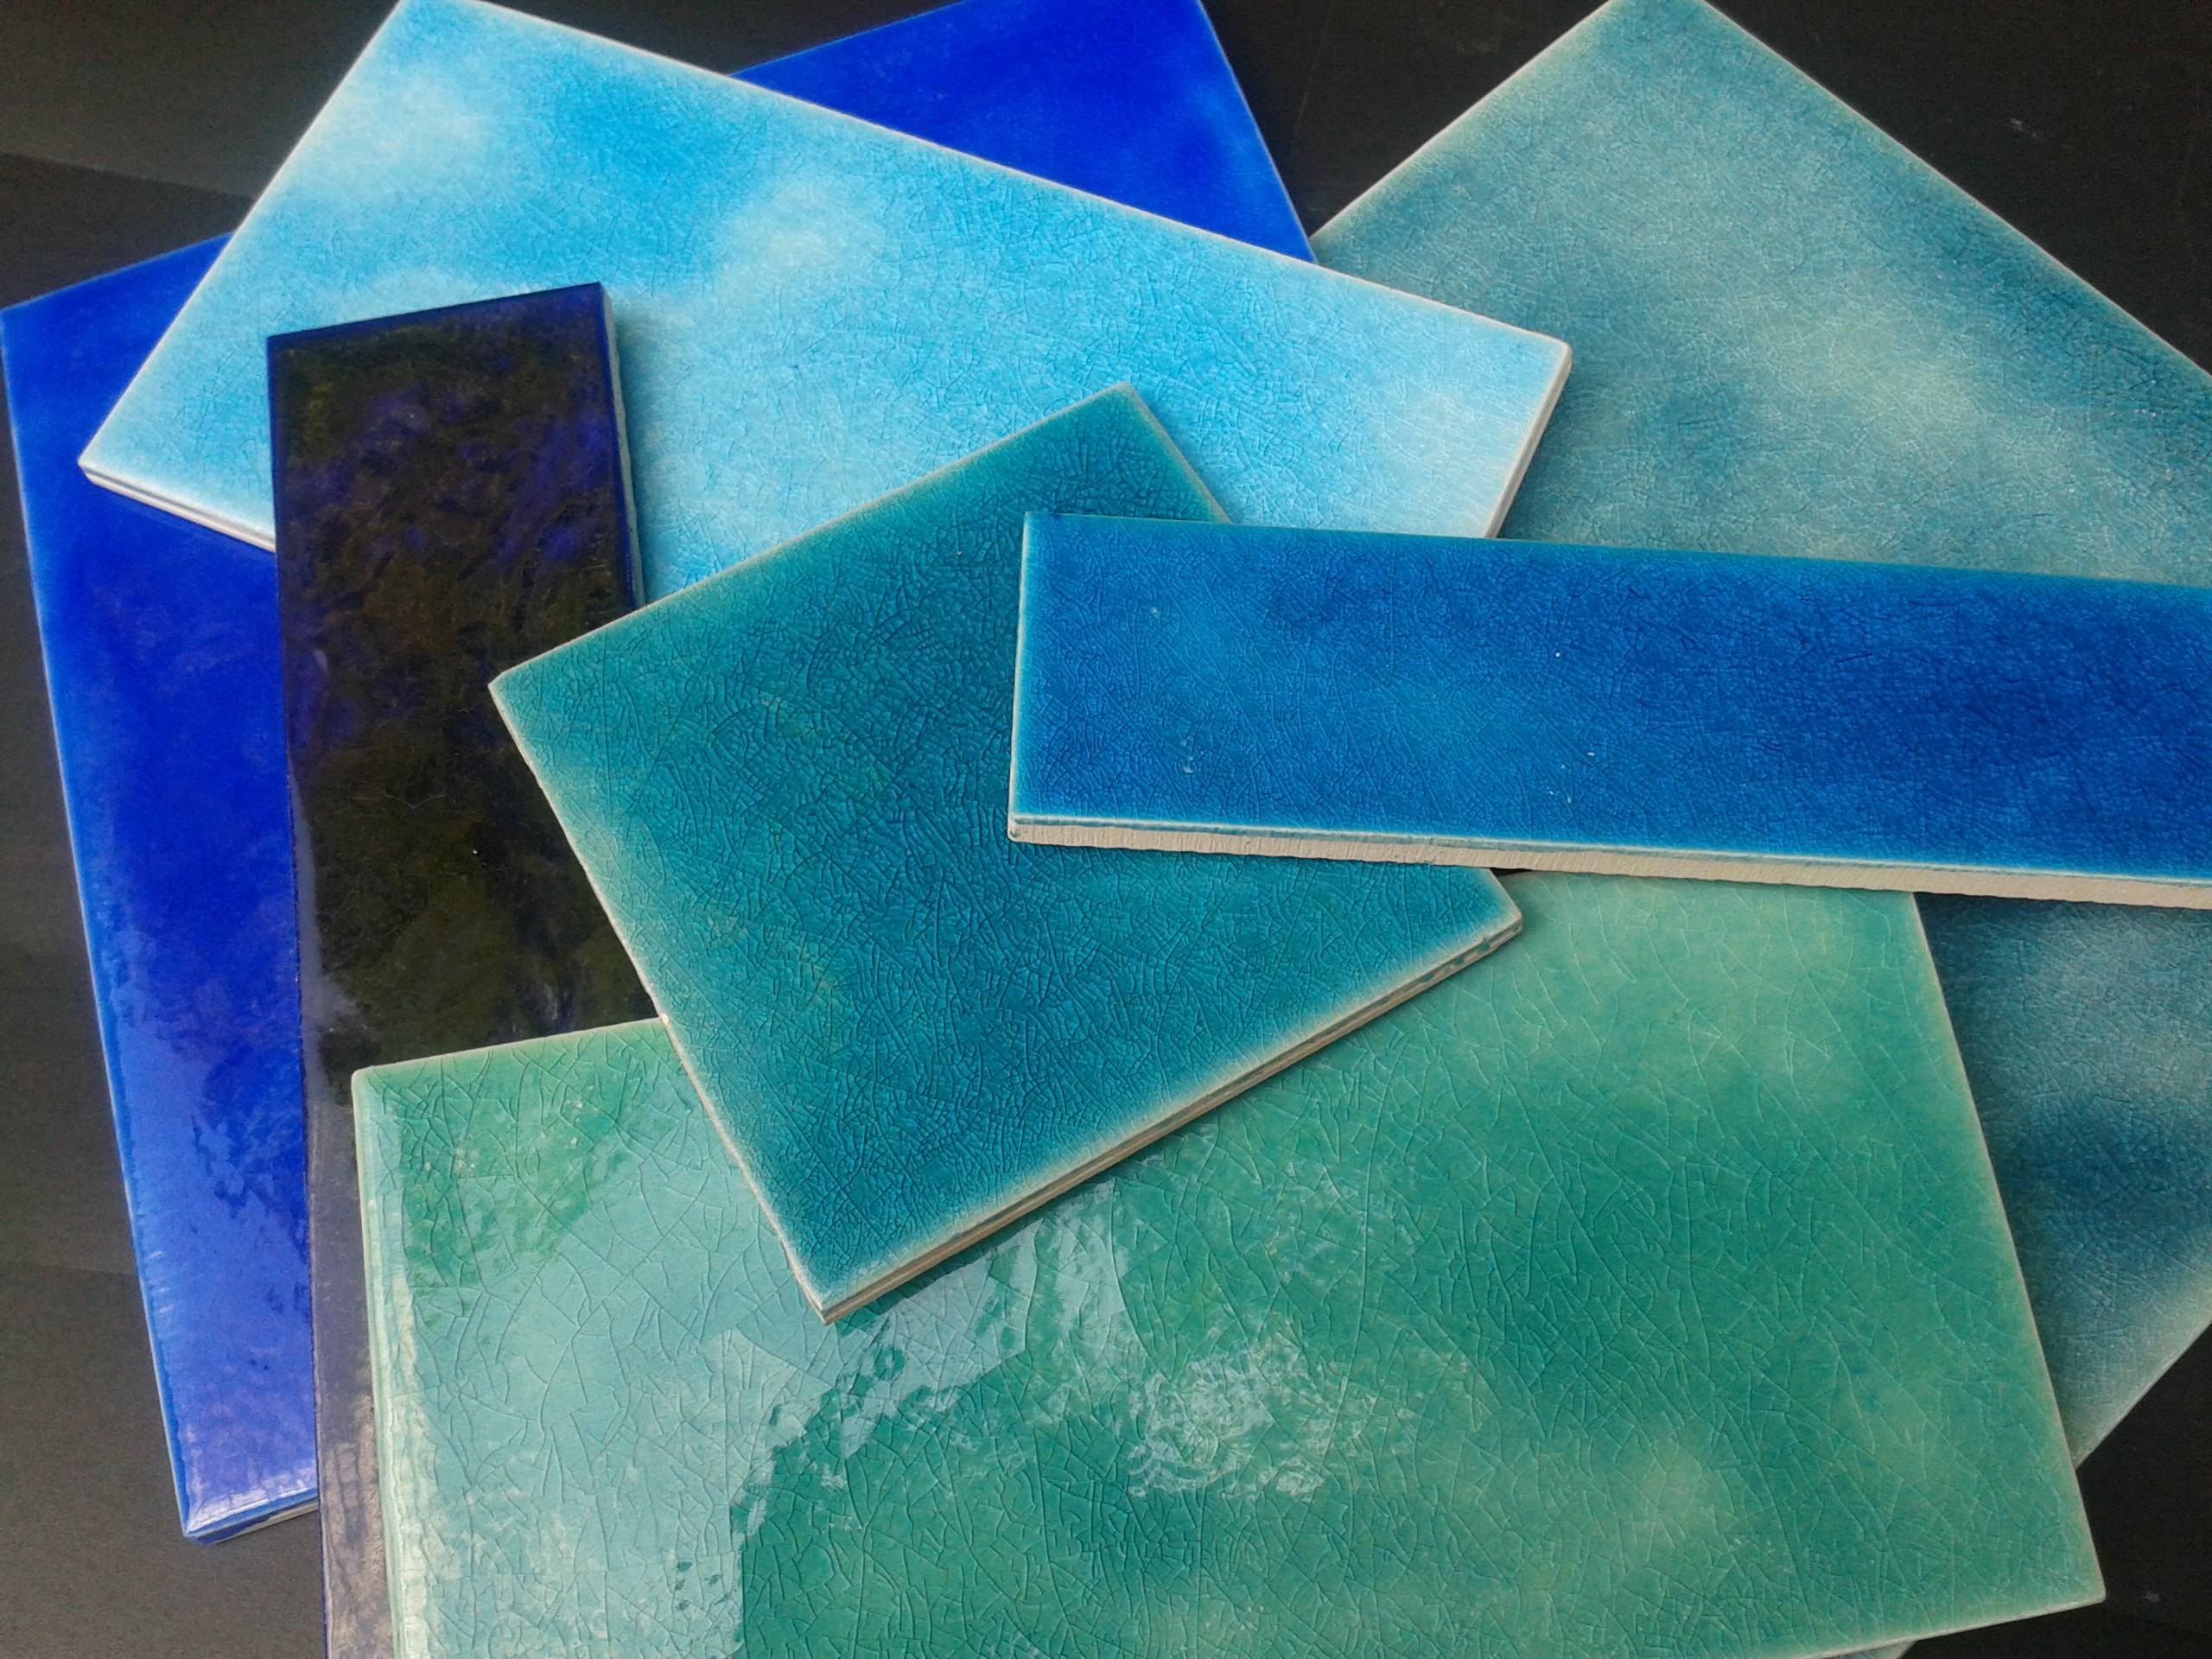 Persian glazed plain blues available in all sizes